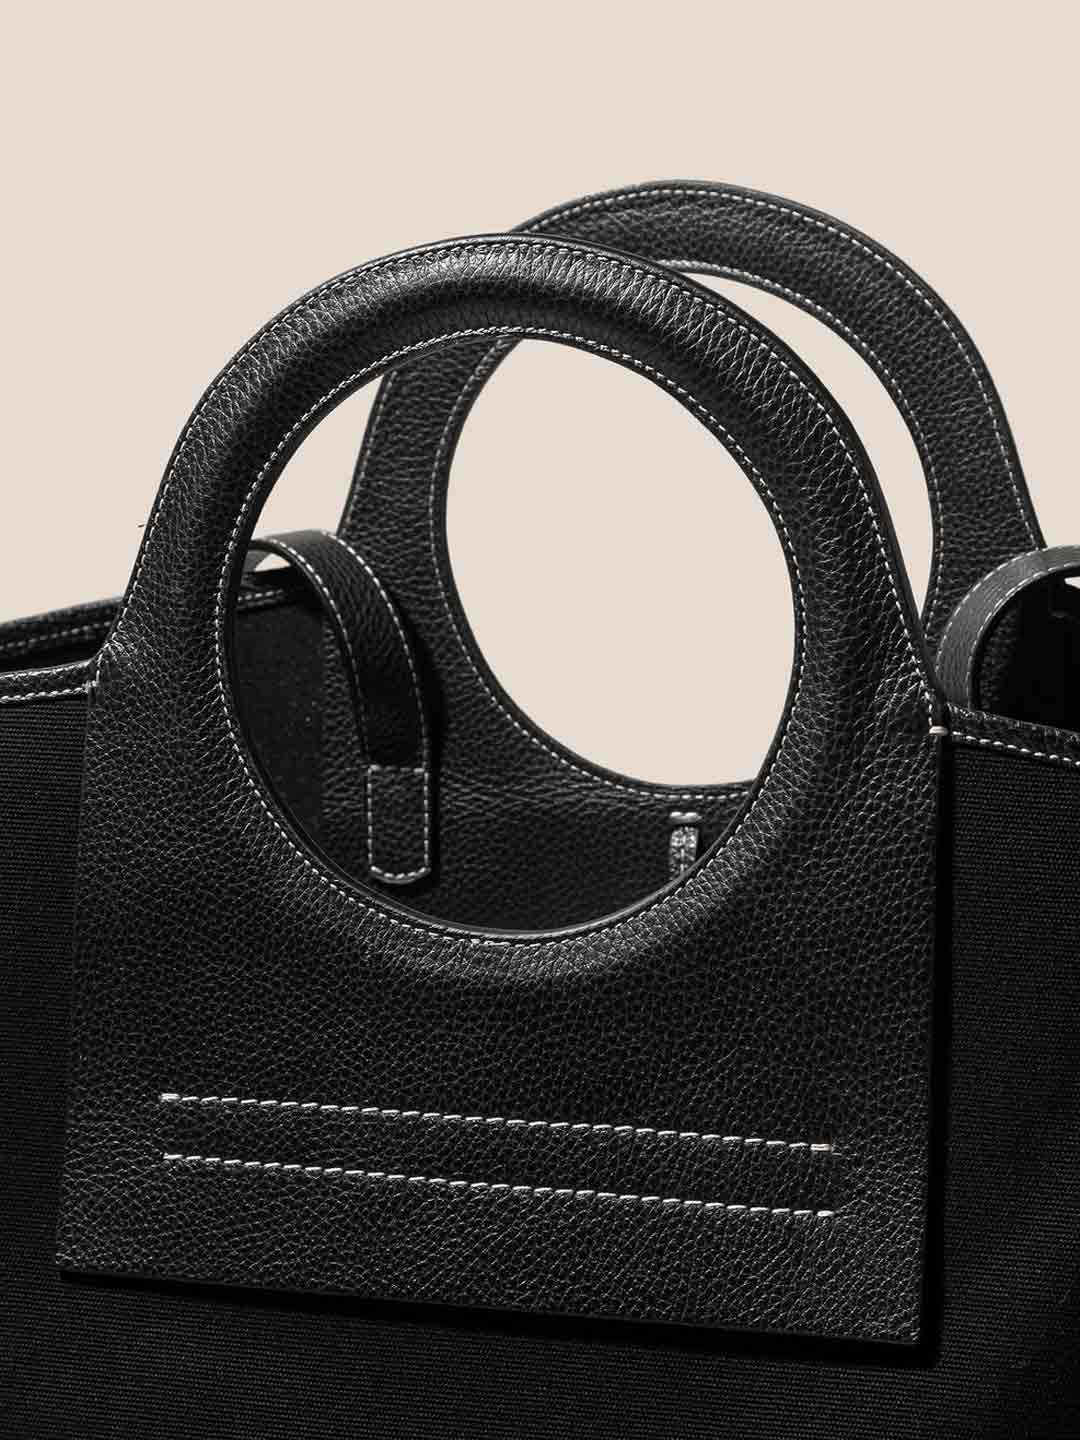 CALA L GRAINY - Leather-trimmed Canvas Tote Bag